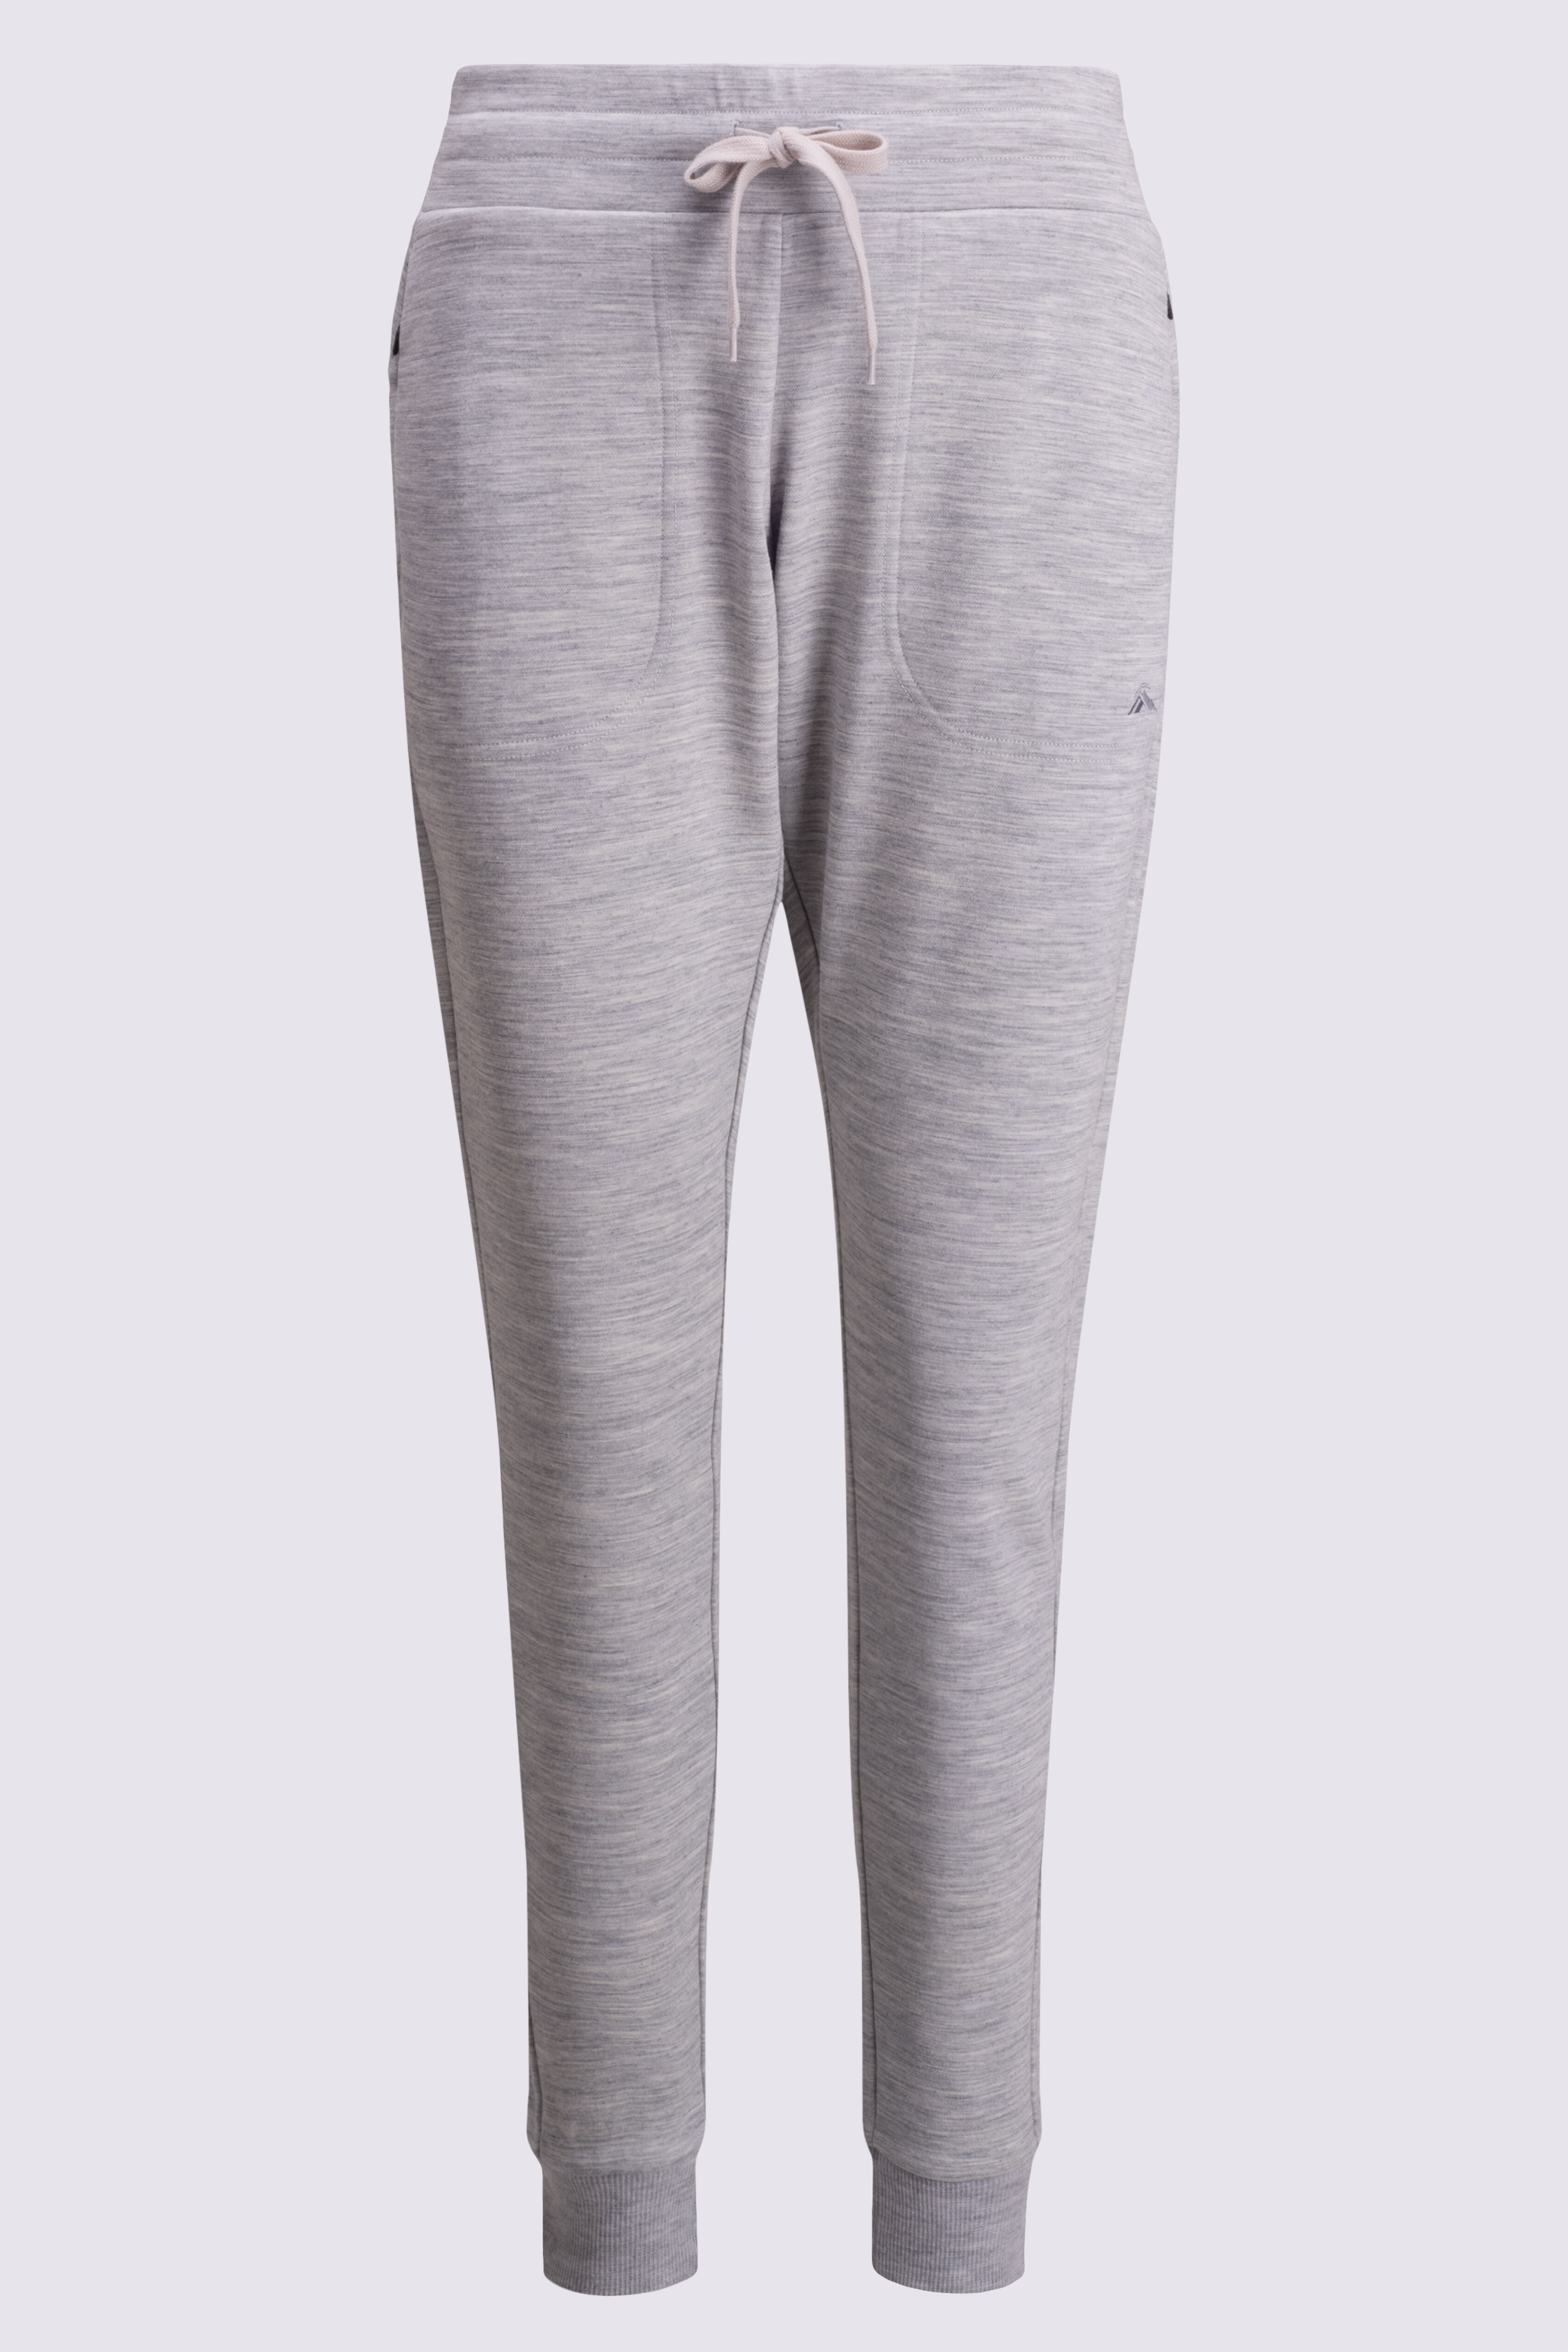 Buy Blue Track Pants for Women by Jukebox Online | Ajio.com